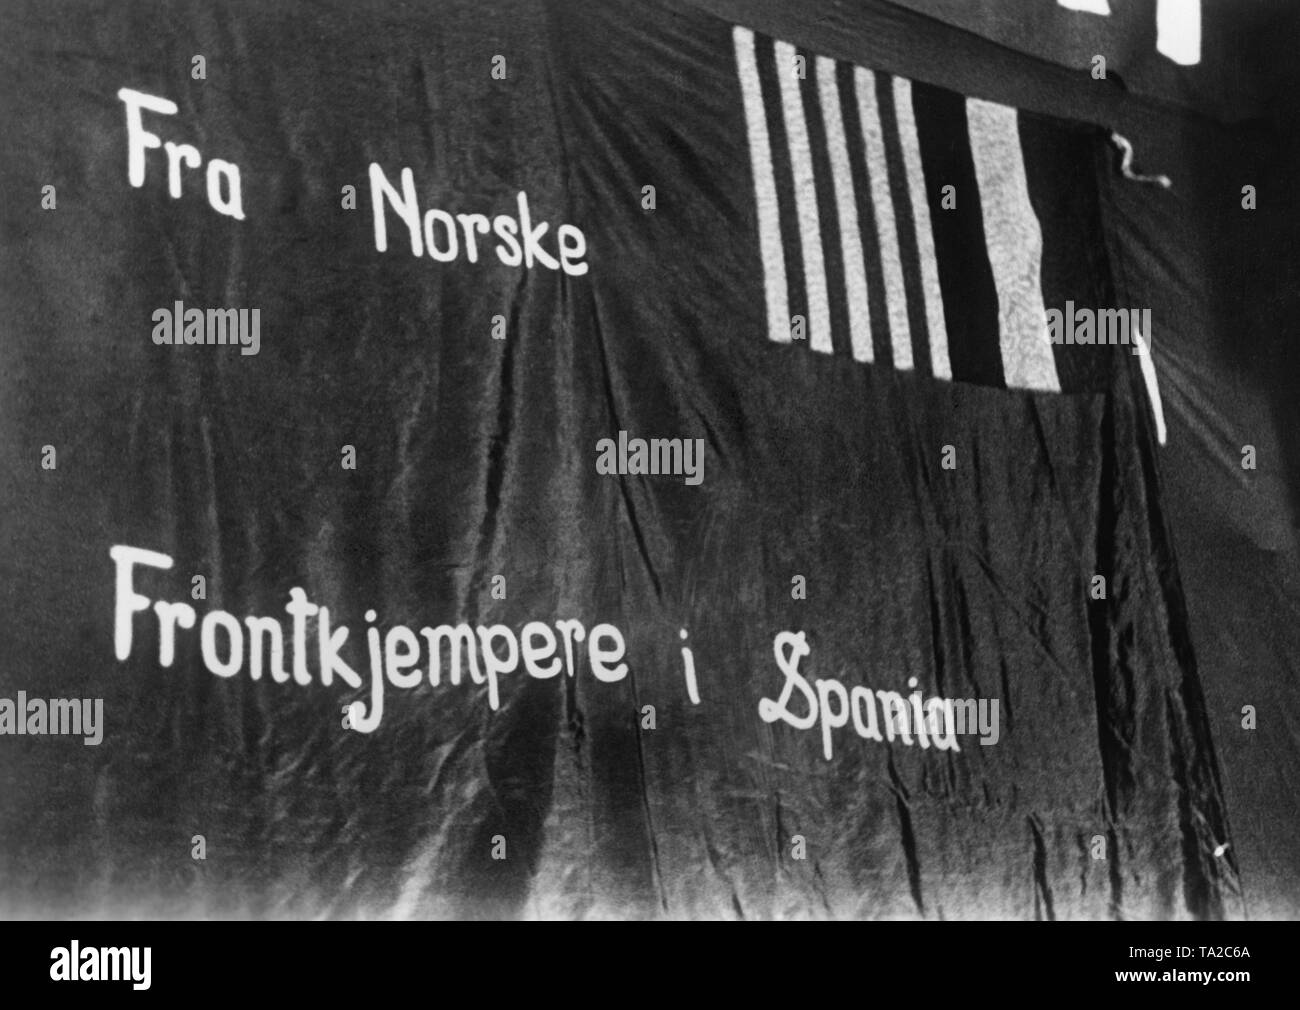 Photo of a flag of Norwegian volunteers of the International Brigades in the Spanish Civil War, 1937-1939. The banner says: "As a front fighter in Spain from Norway". Stock Photo